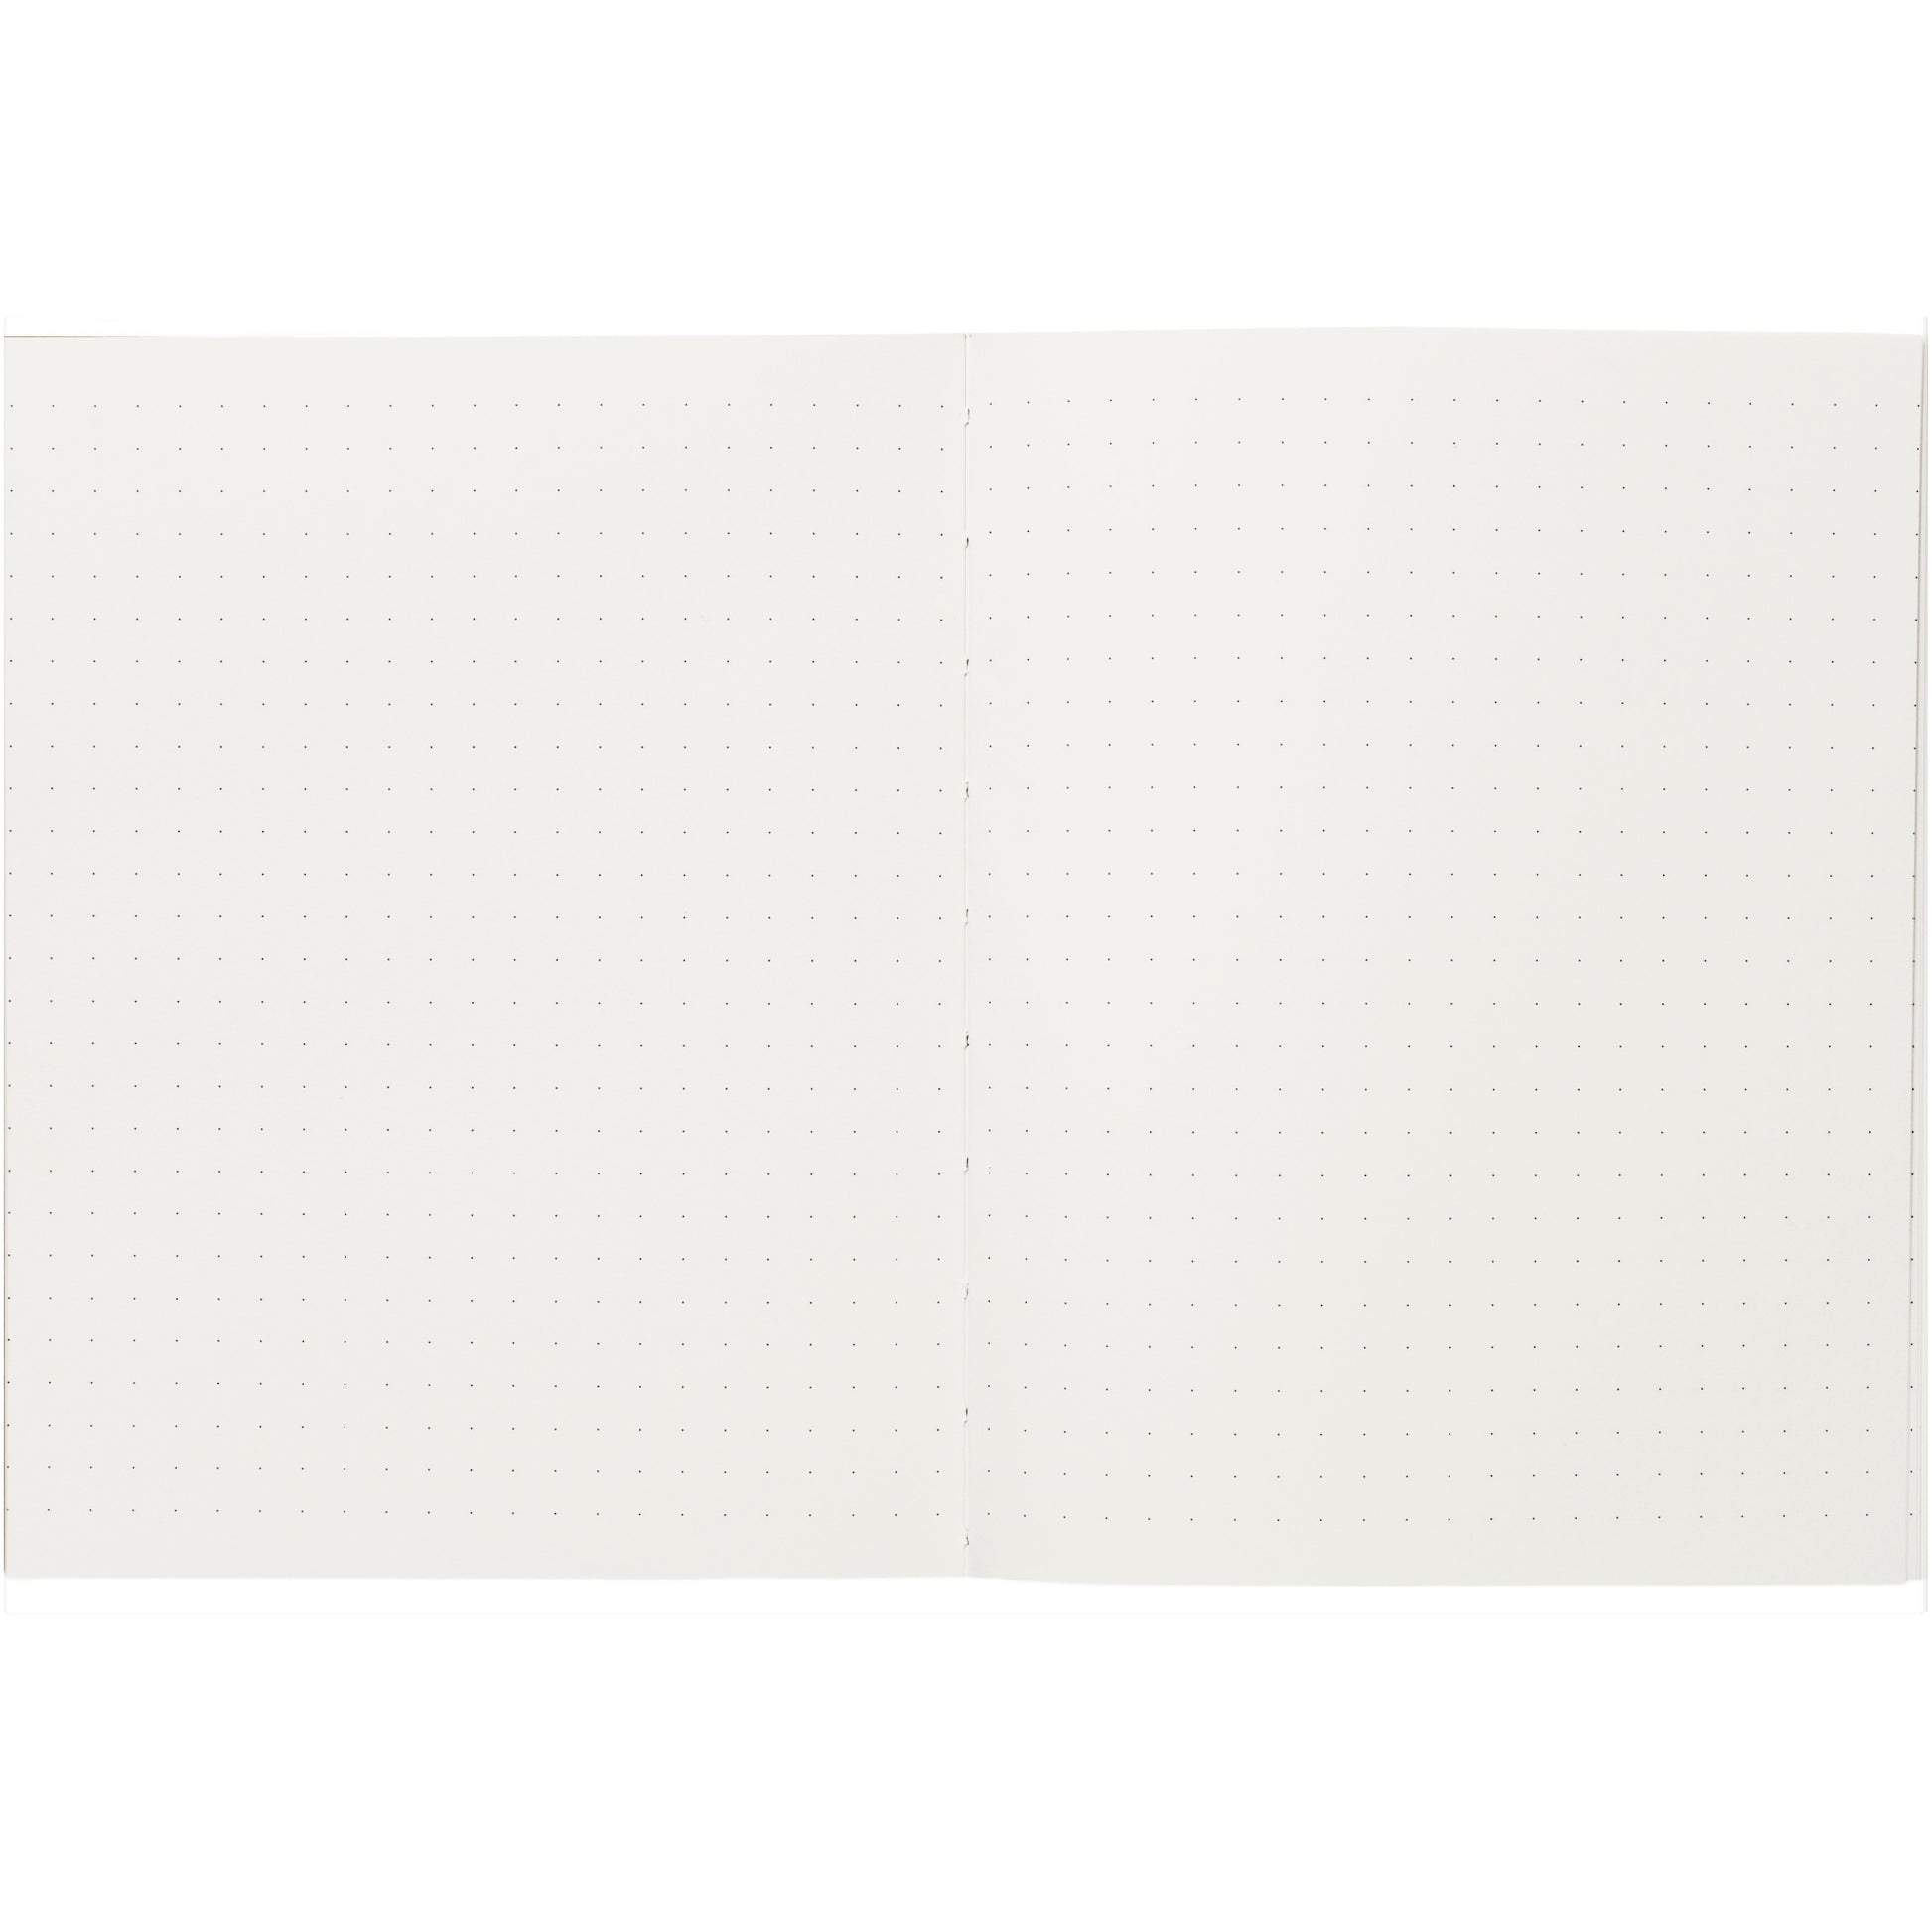 Layflat notebook with dark ochre softcover with black grid lines, inner dotted pages pictured